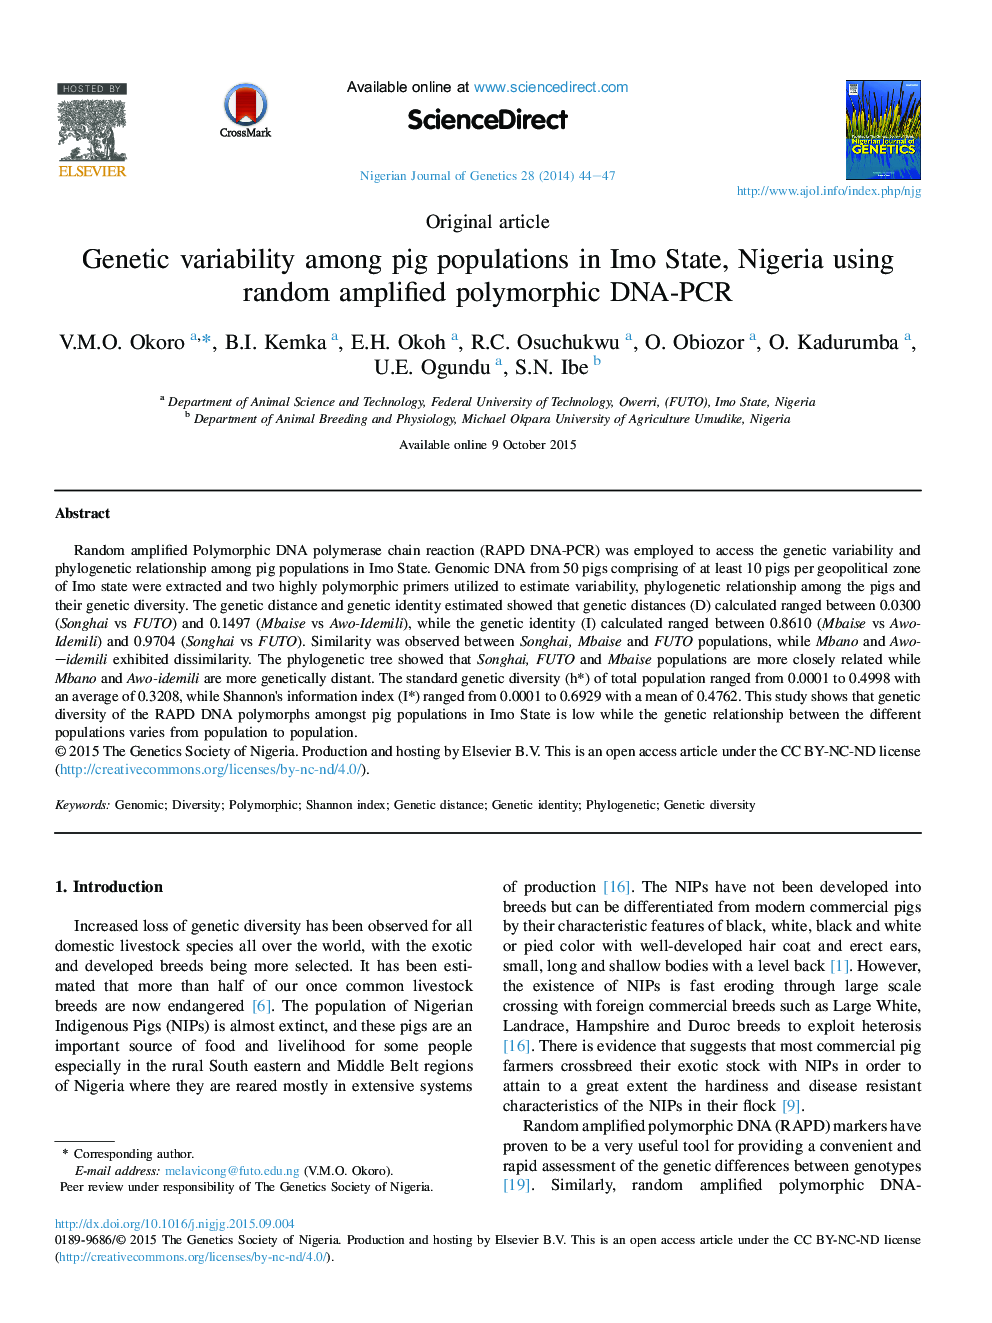 Genetic variability among pig populations in Imo State, Nigeria using random amplified polymorphic DNA-PCR 